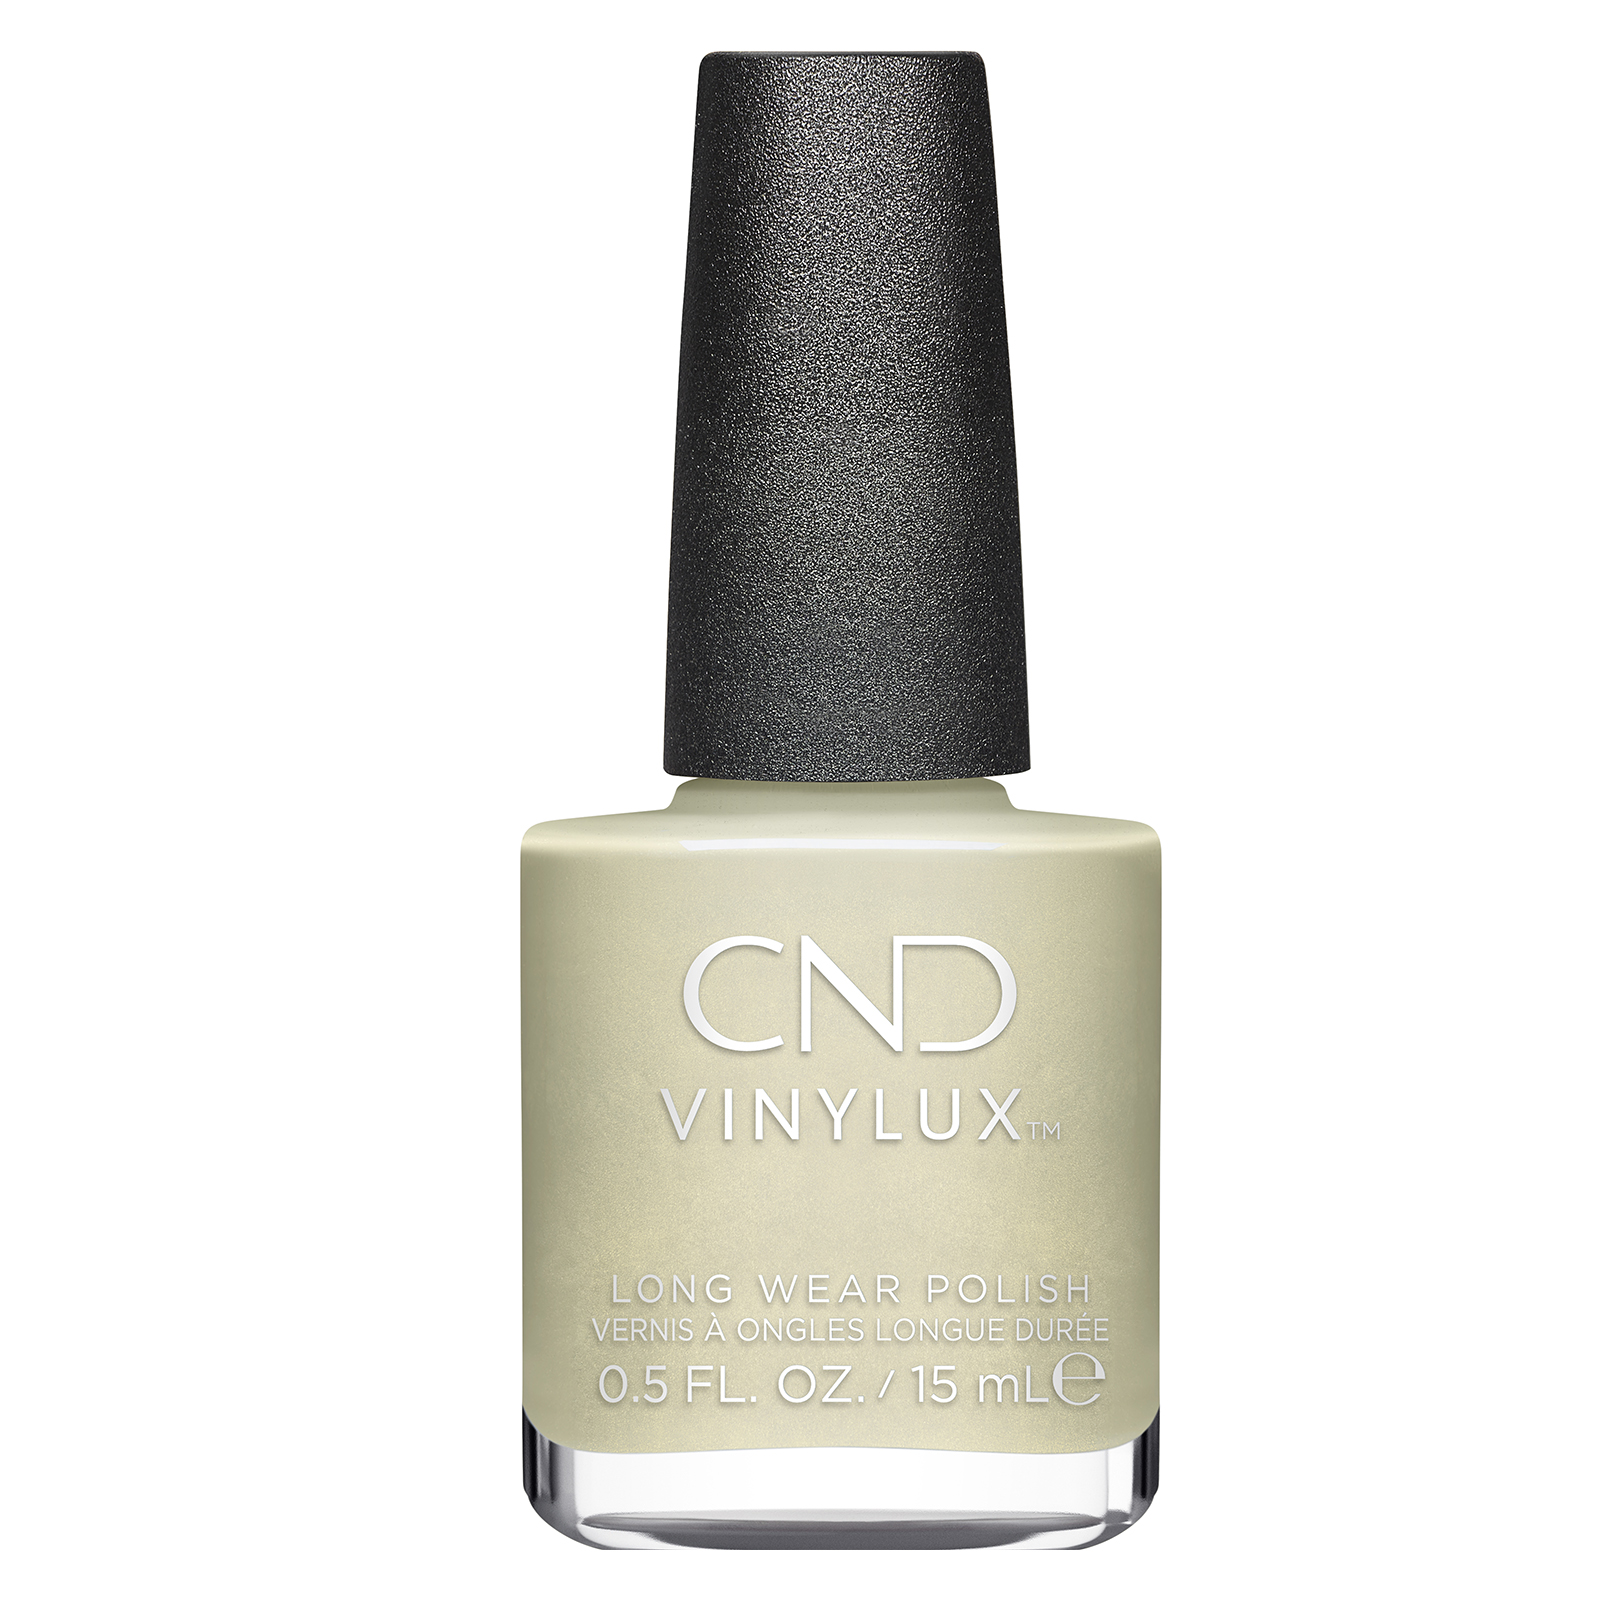 CND Shellac Upcycle Chic Autumn 2023 6 X 7.3ml -  Canada